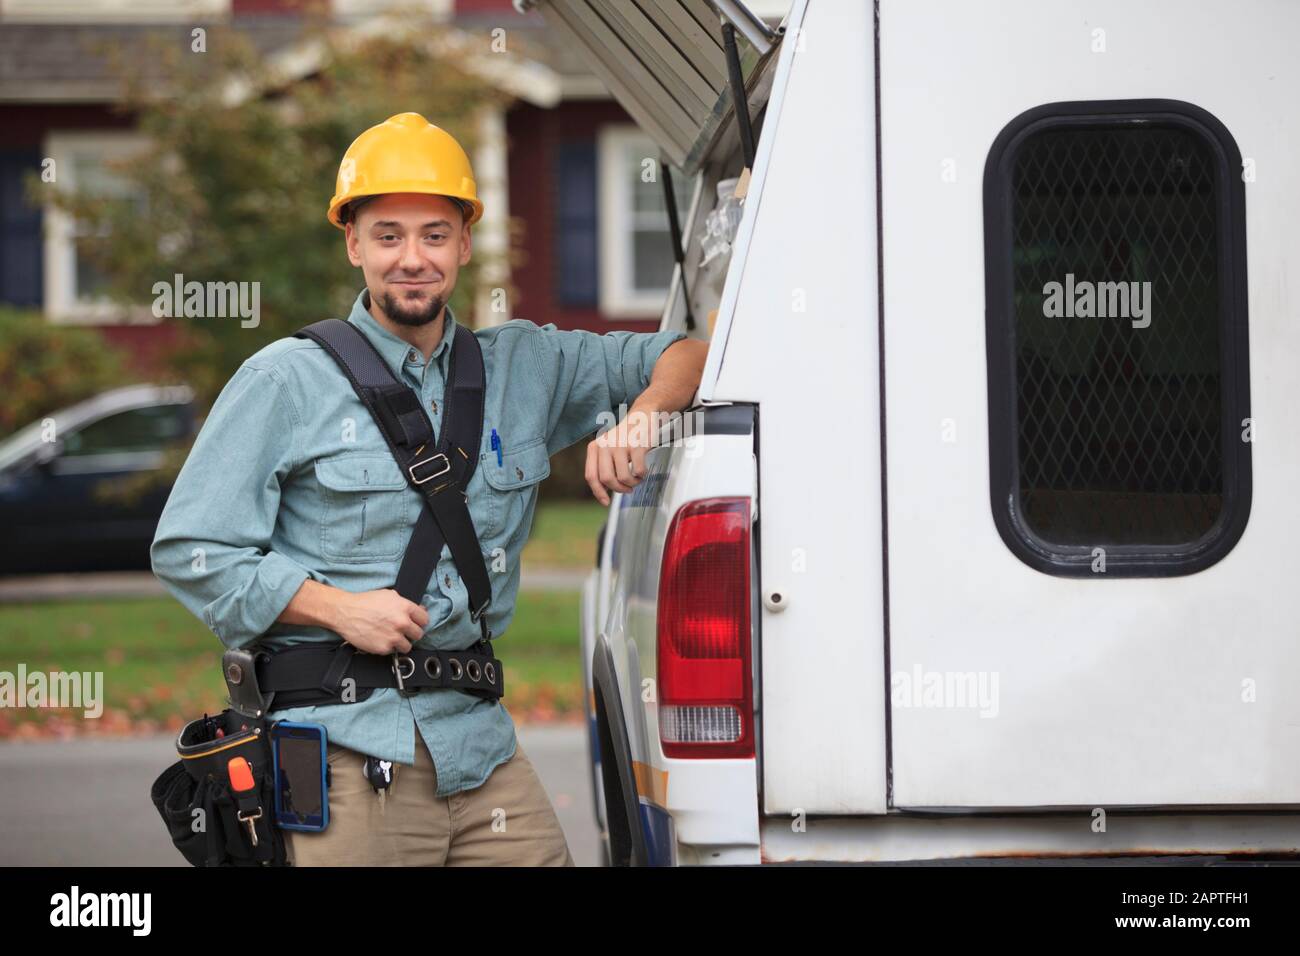 Tradesman retrieving supplies from an open hatch on the side of his work truck Stock Photo